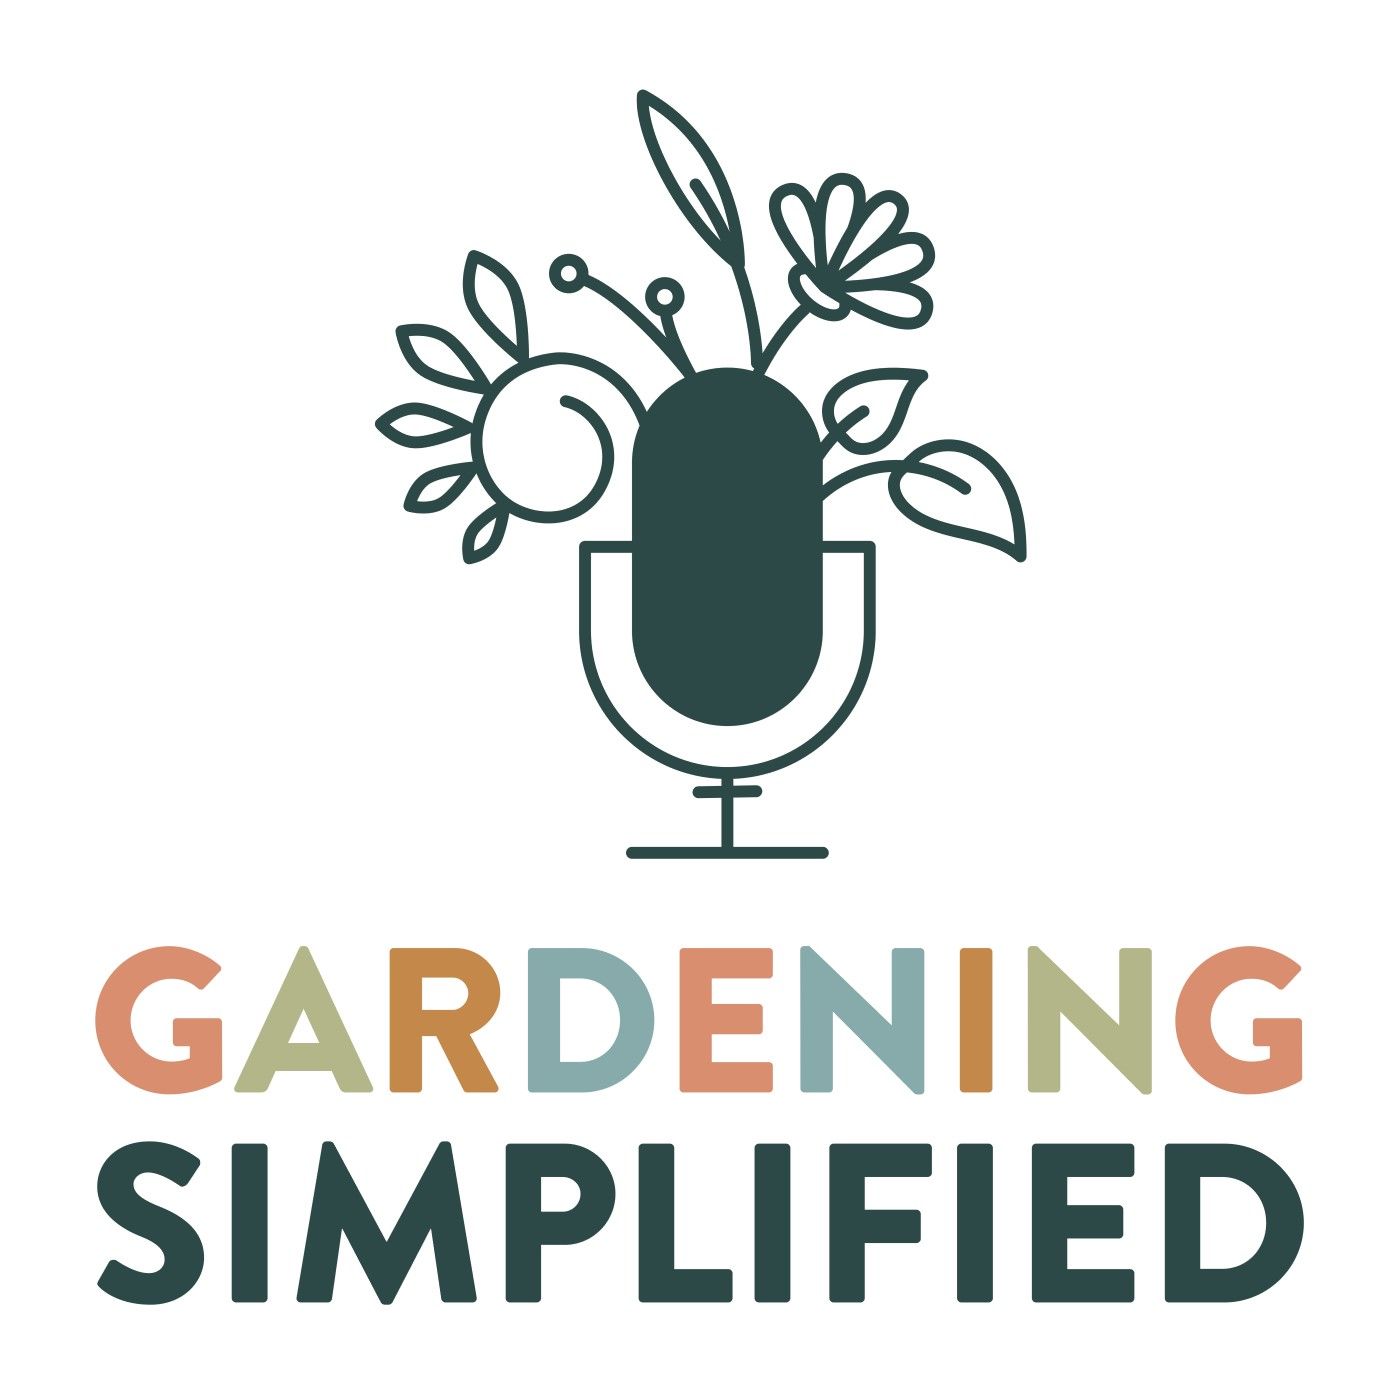 Stacey and Rick’s New Year’s (Gardening) Resolutions